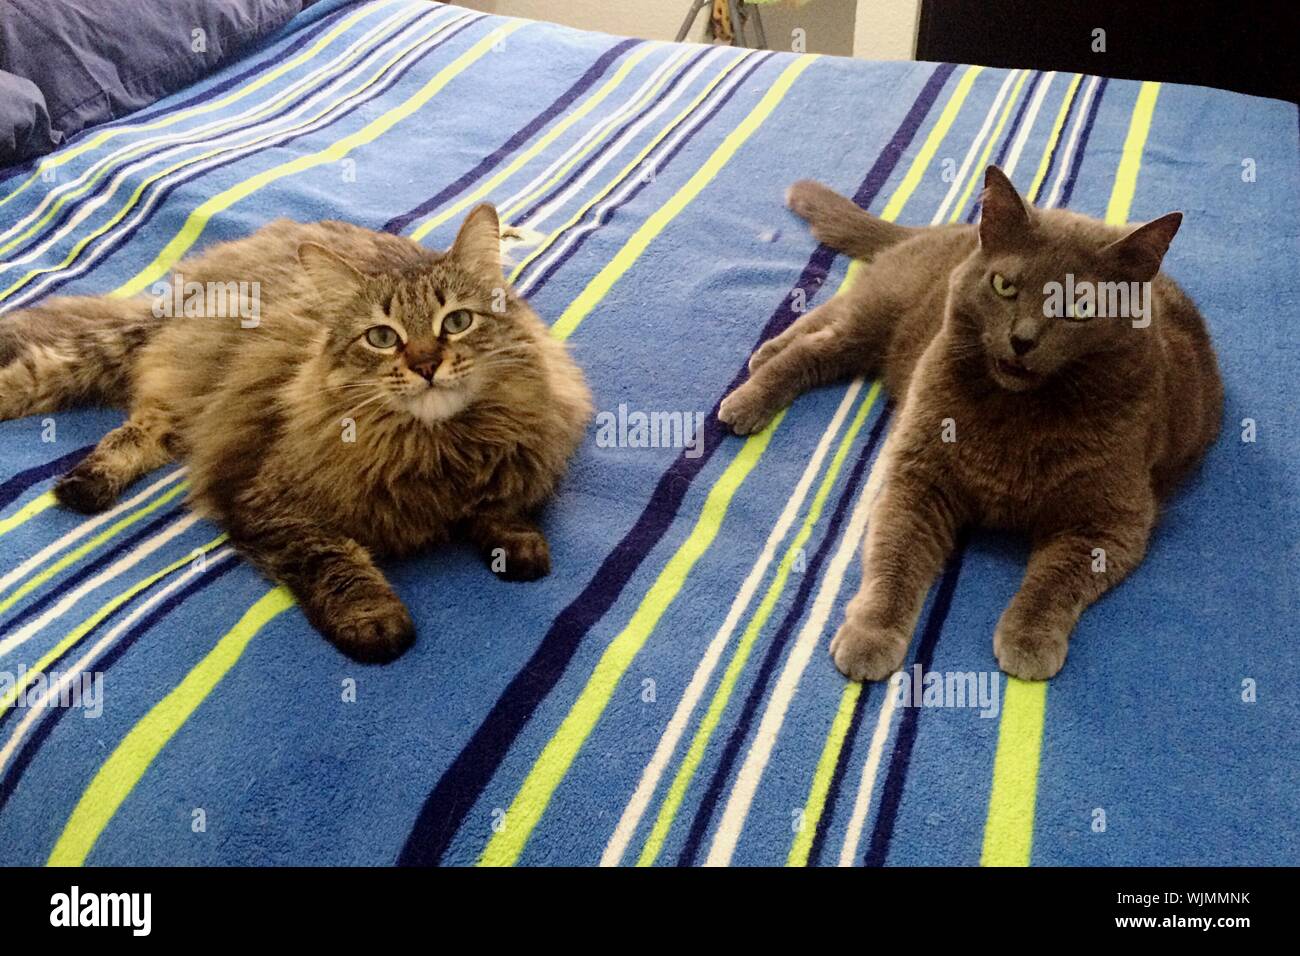 High Angle View Of Domestic Cats On Bed Stock Photo